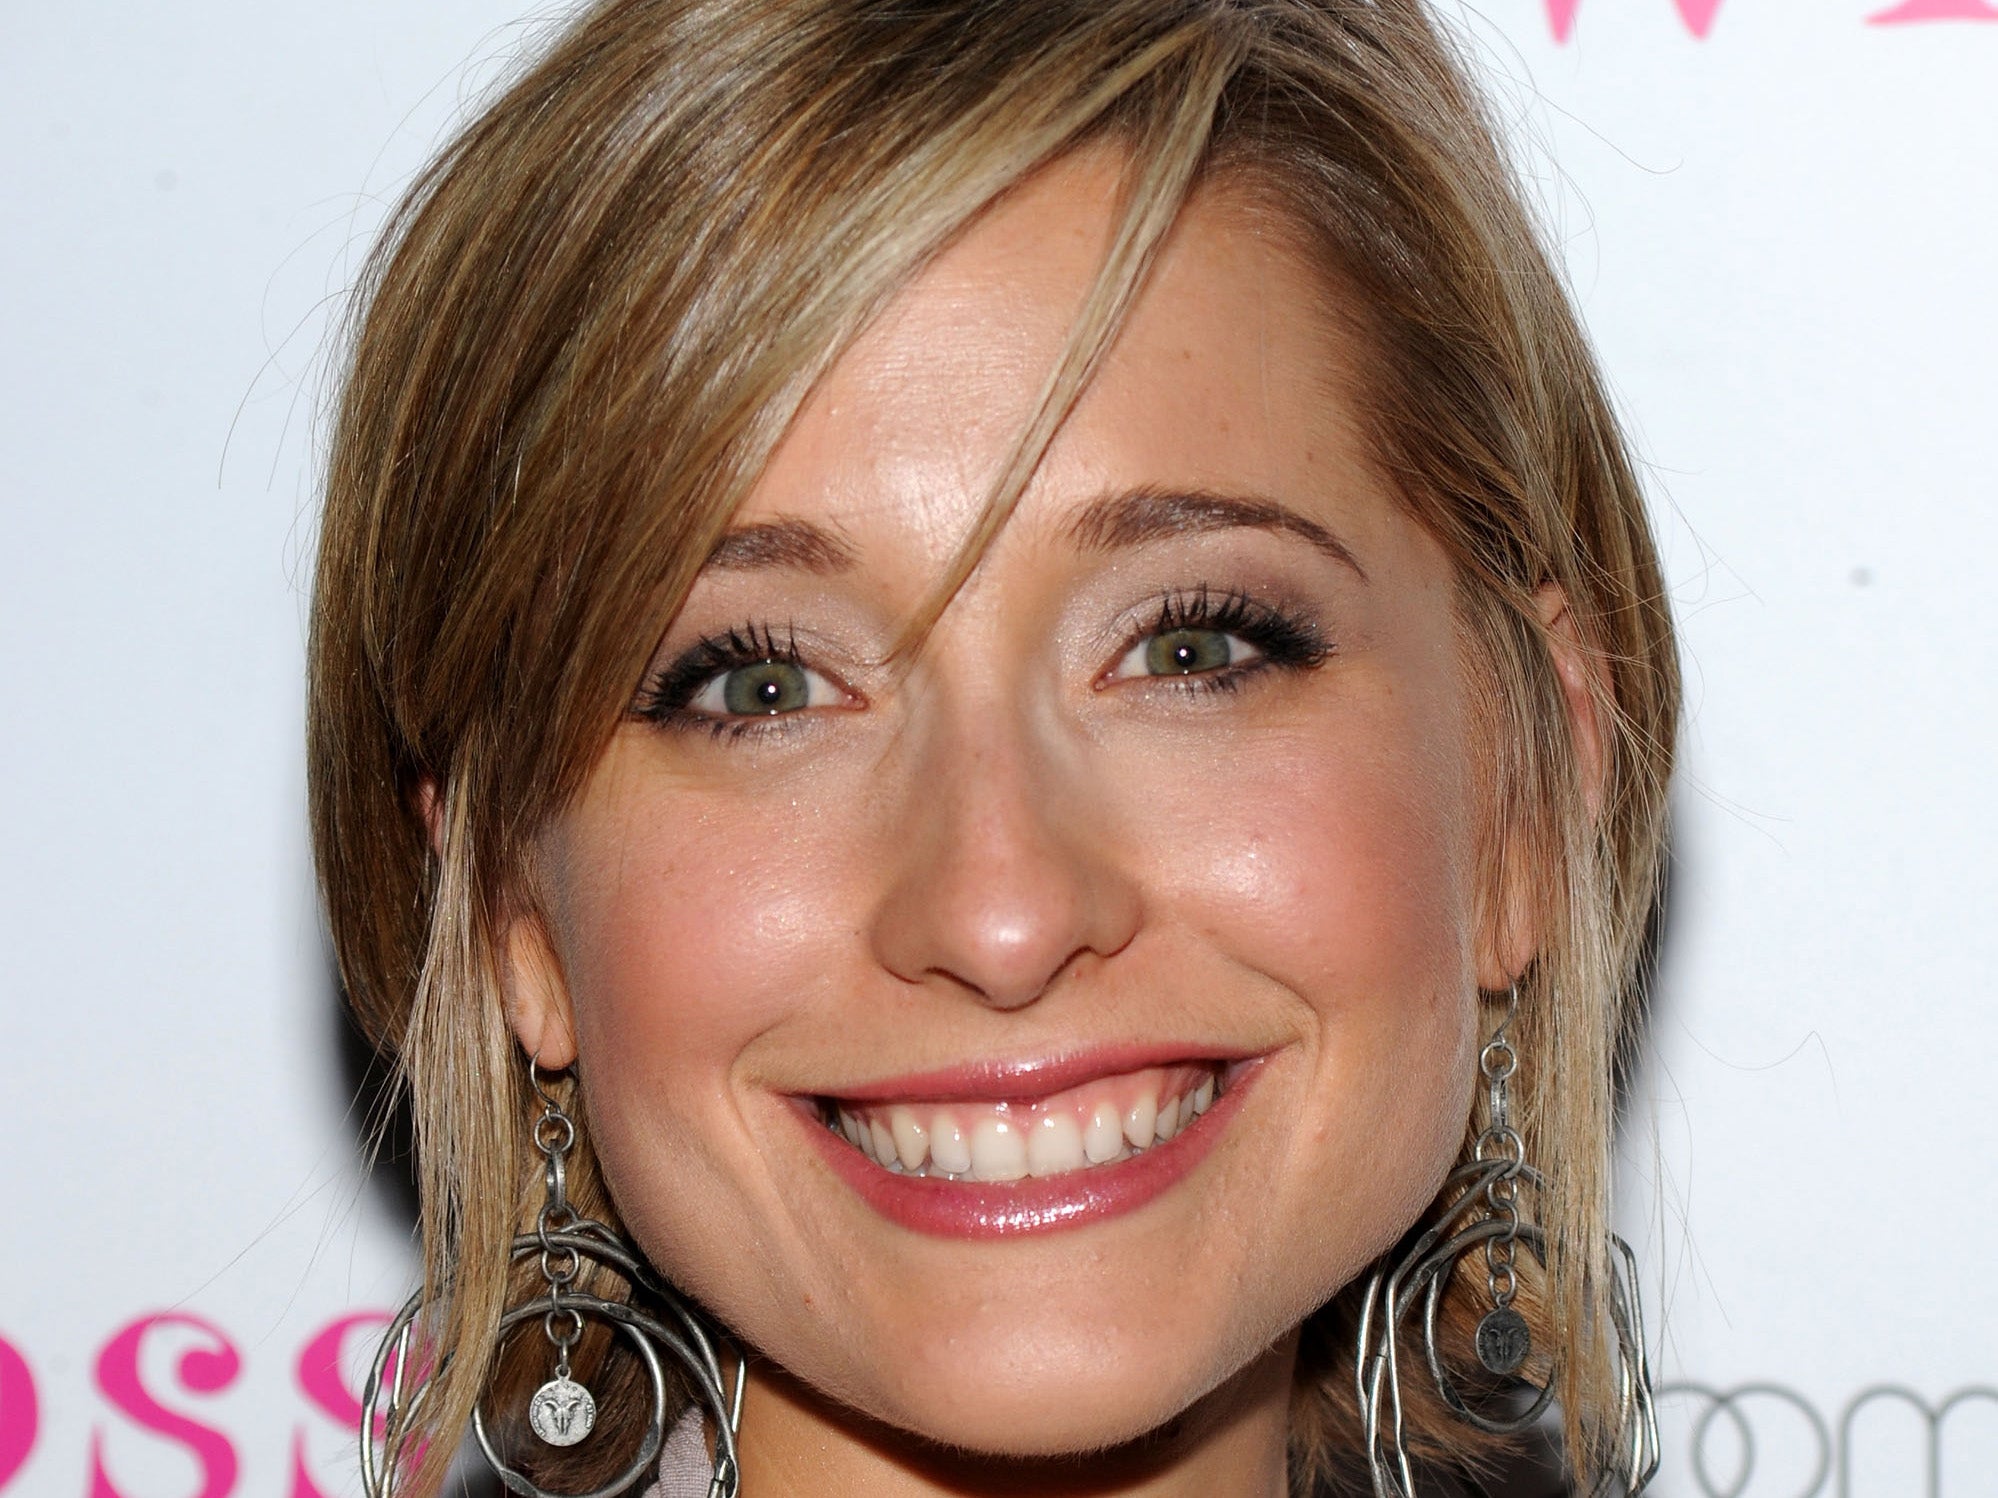 Smallville Actor Allison Mack Charged With Trafficking Over Involvement In Sex Cult The